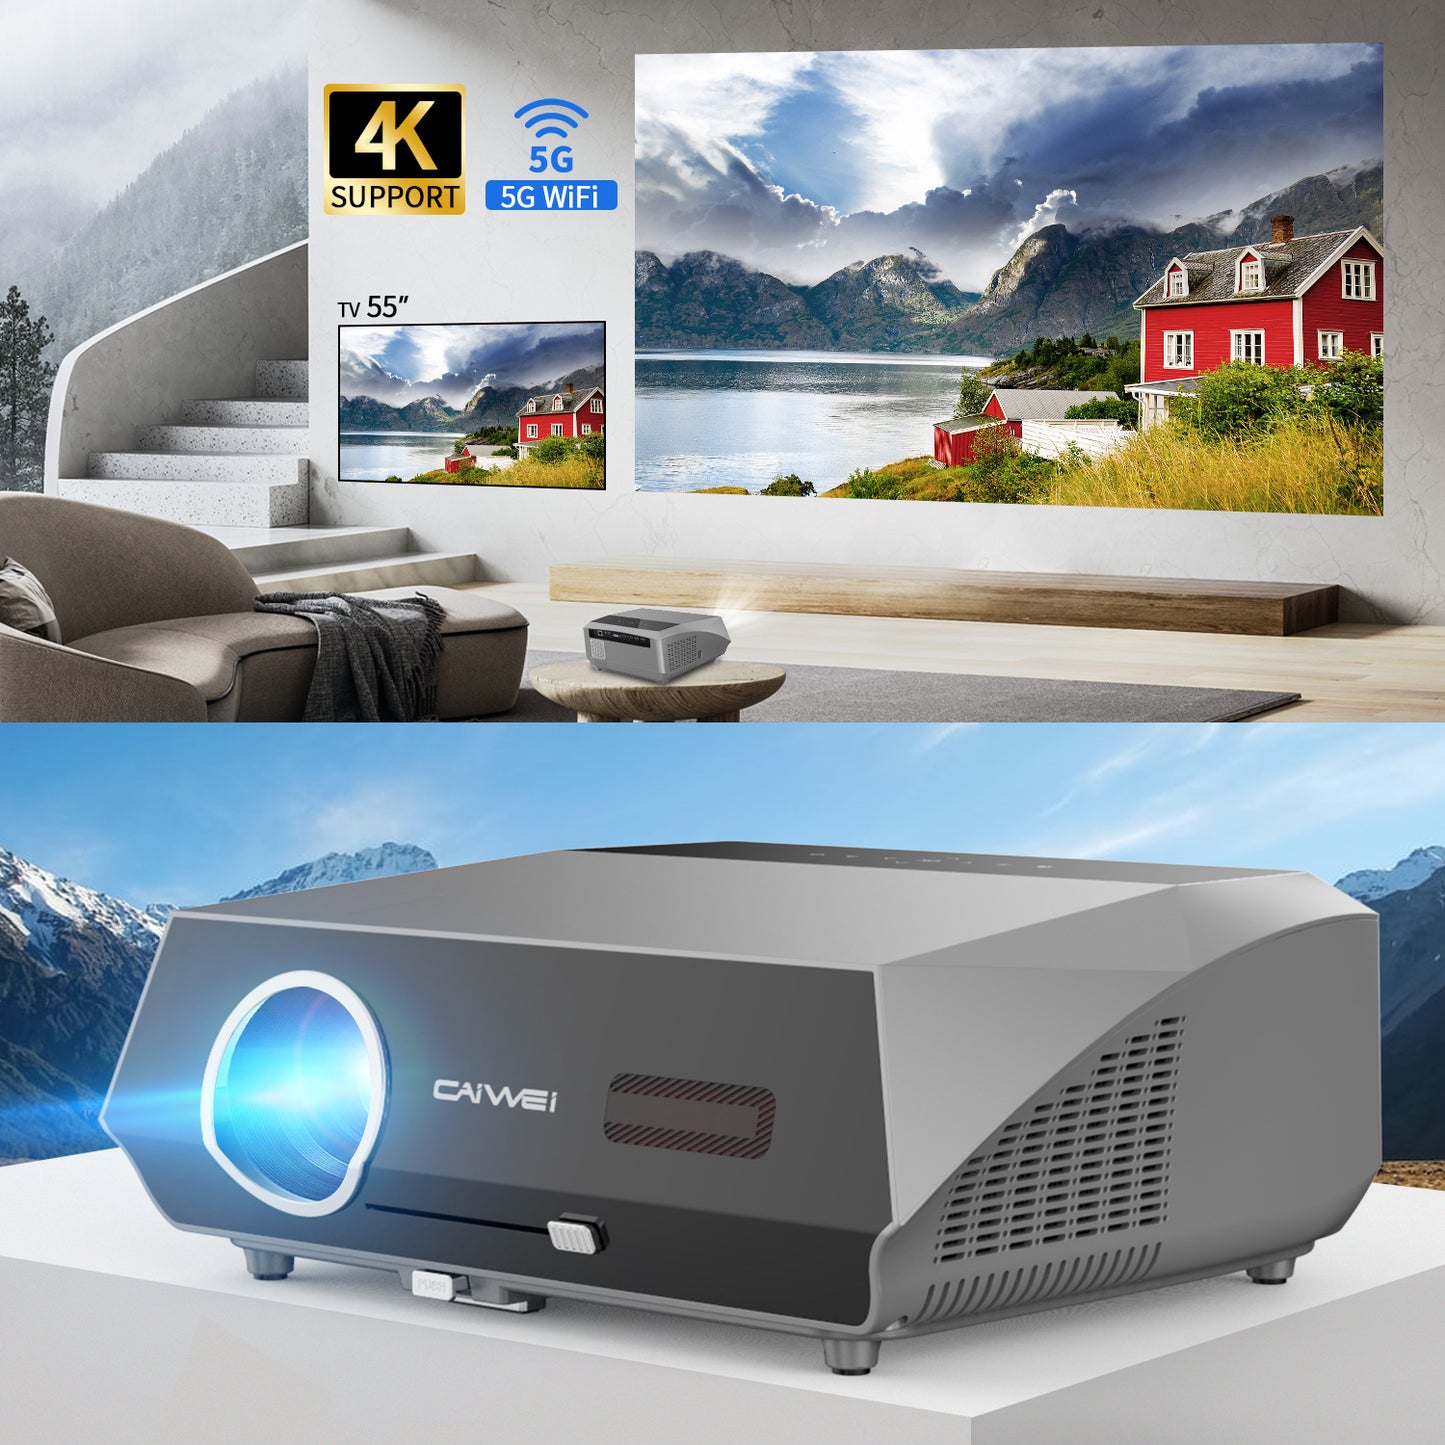 Ultra Bright 4K Projector Auto Focus & Keystone, 1200 ANSI Daylight Projector Full HD with WiFi 6 and Bluetooth, 2G+16G Android TV OS for Netflix Disney+ HDMI ARC USB